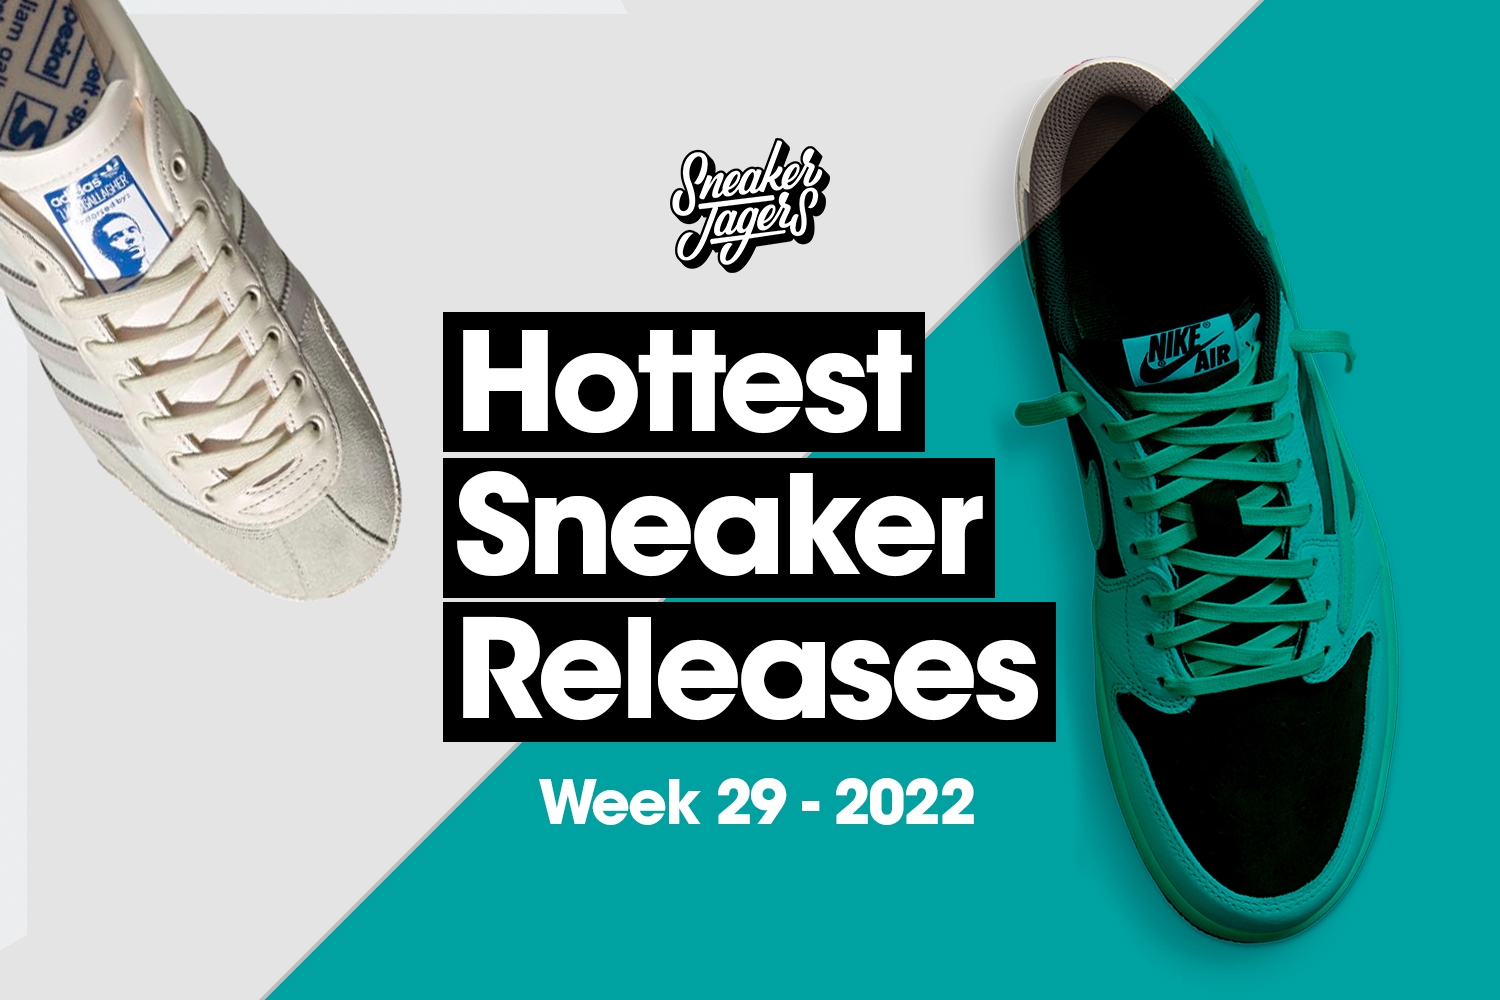 The Hottest Sneaker Releases - Week 29